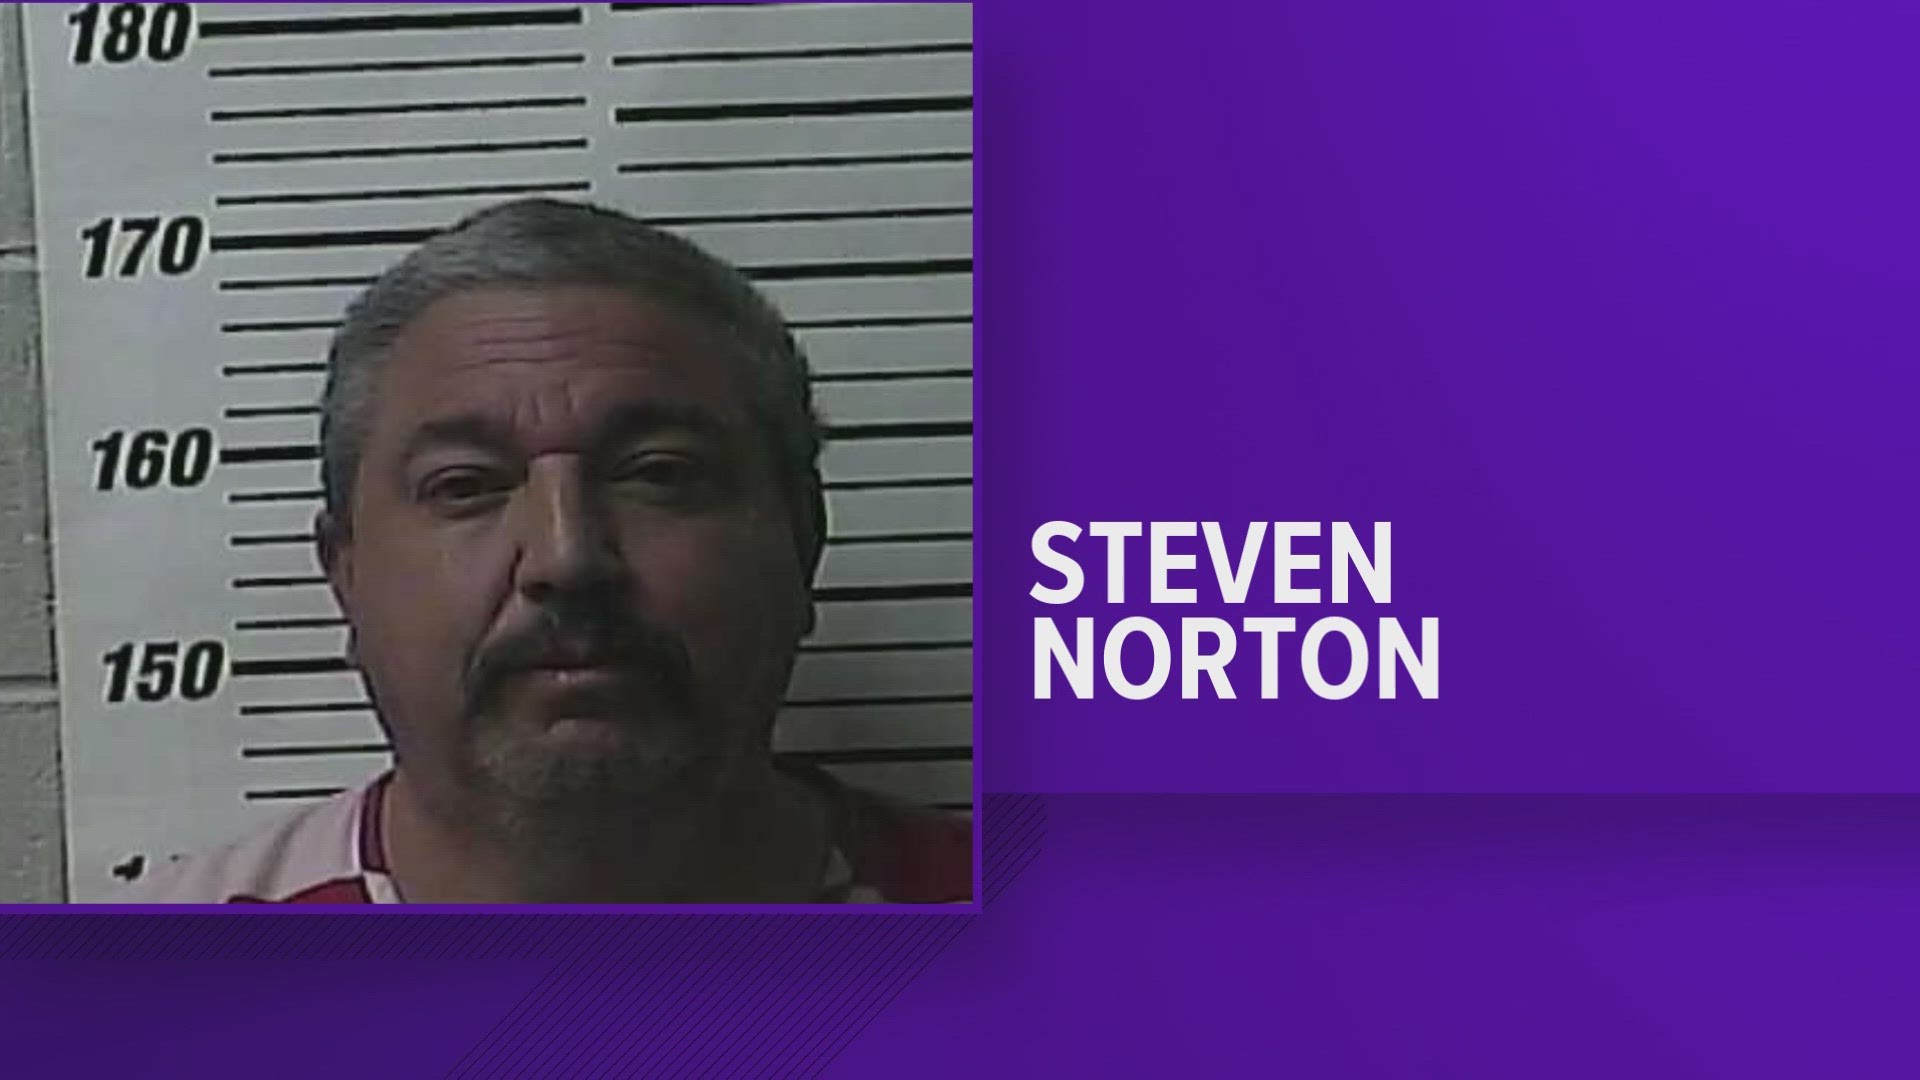 The Jefferson County Sheriff said Steven Norton's employment was terminated on March 4.